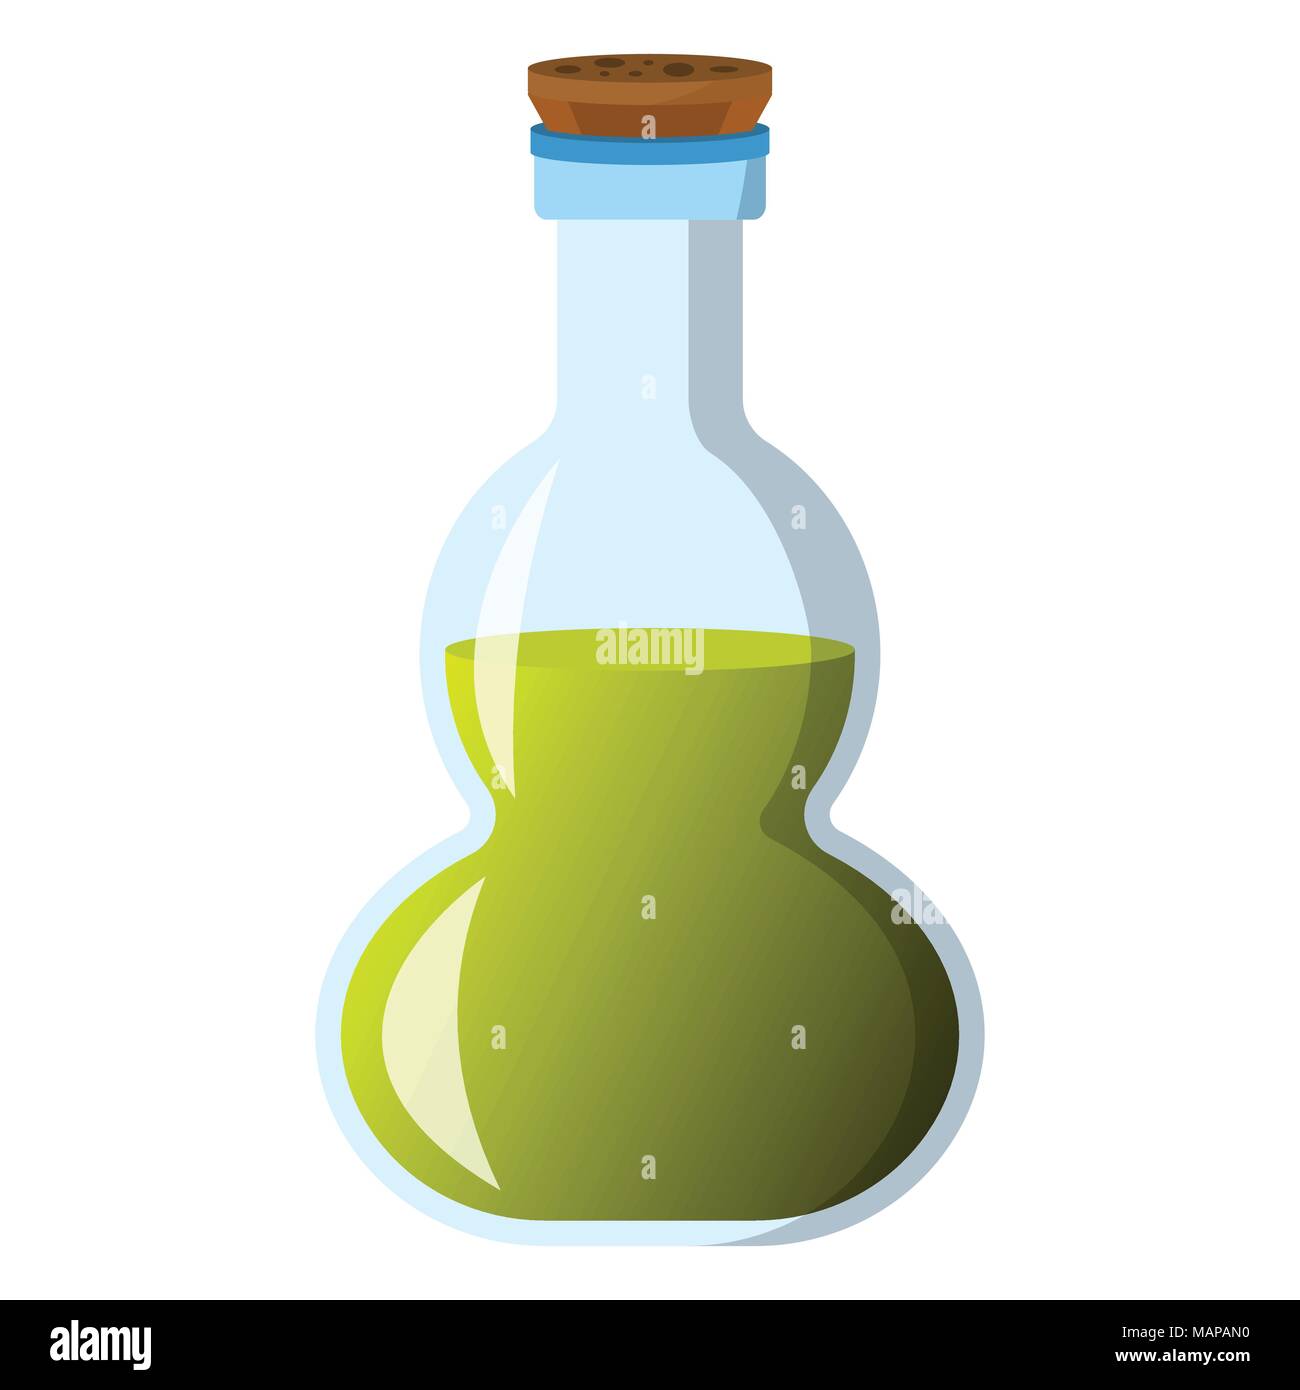 Flask and bottle icon. Label of fantasy potion and elixir. Cartoon style. Vector illustration logo. Stock Vector